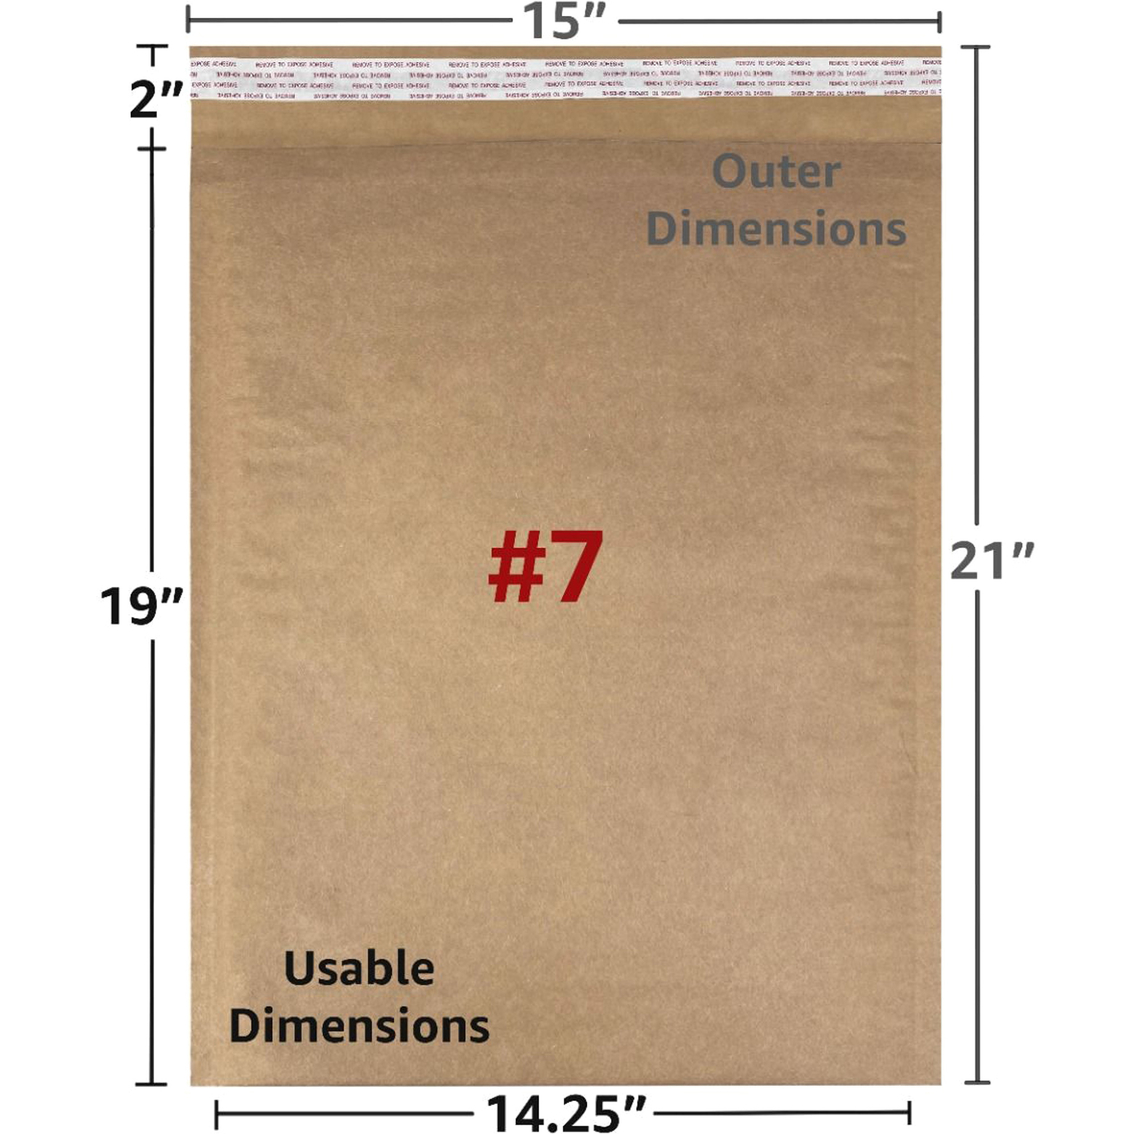 uBoxes Honeycomb Padded Shipping Envelope #7 14.25 x 19 in. Pack of 30 - Image 4 of 4